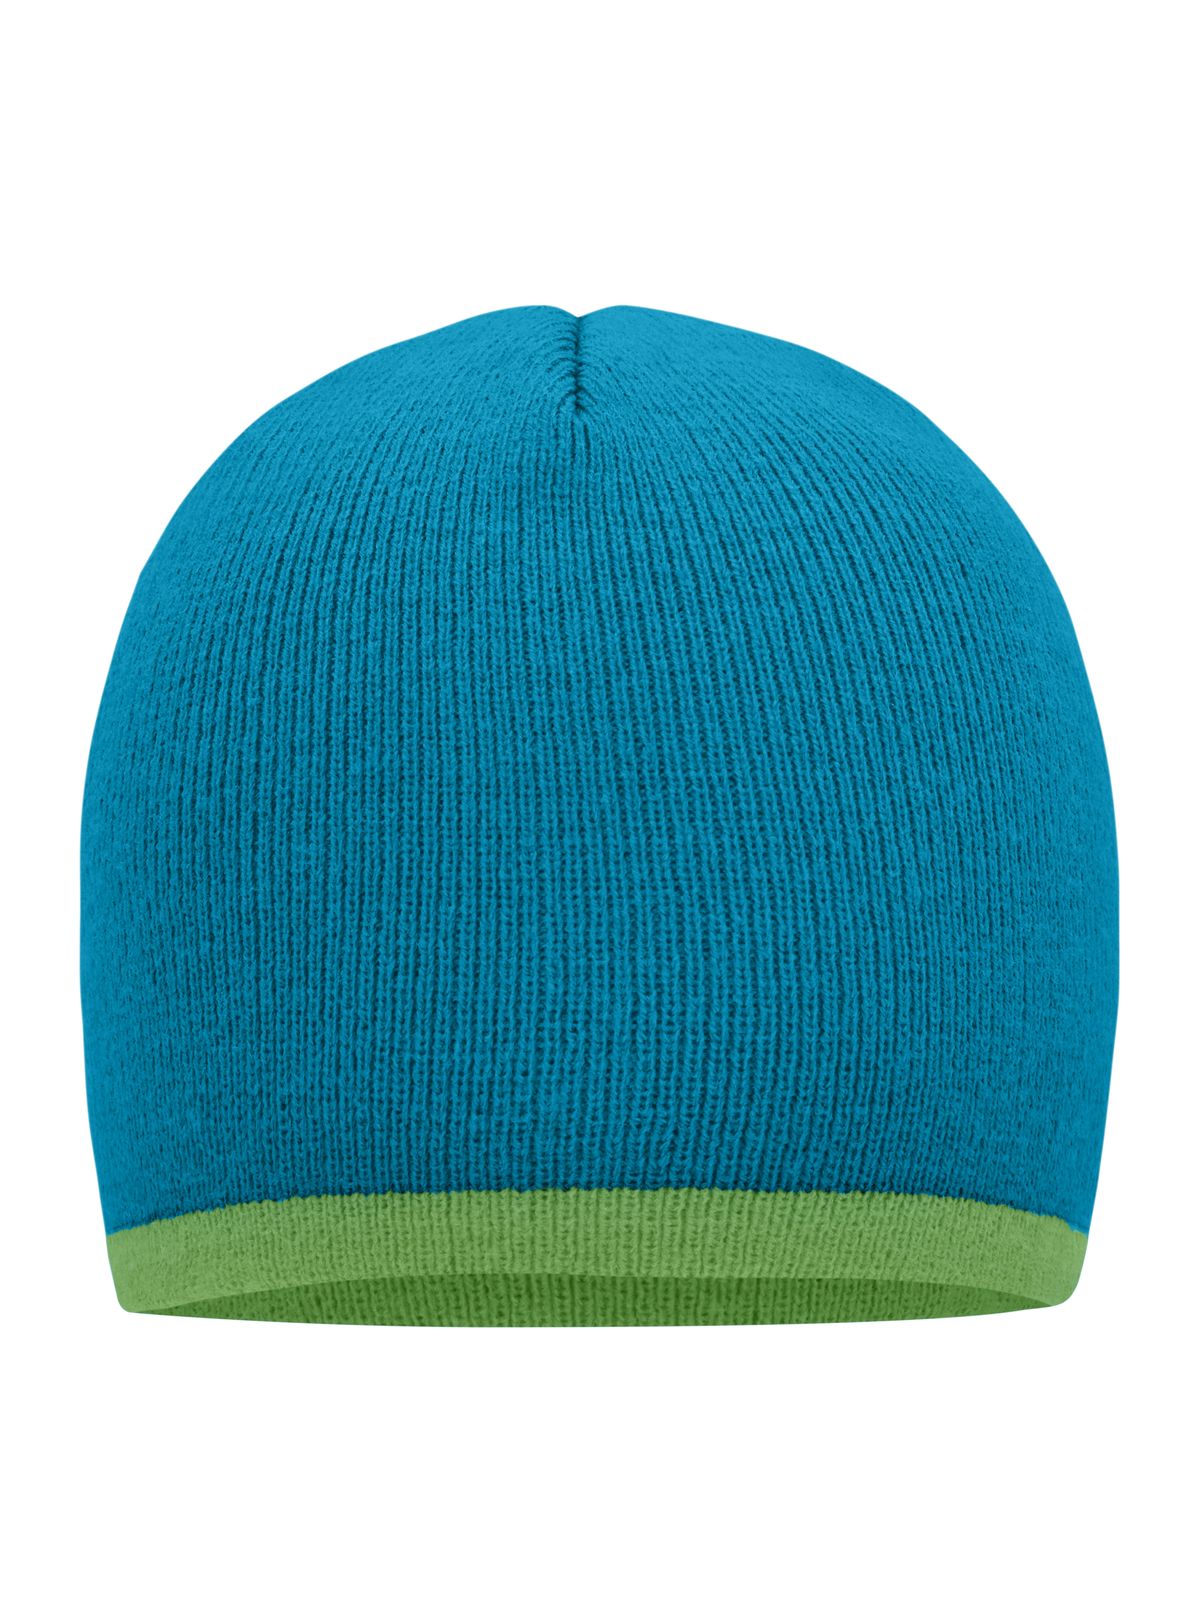 beanie-with-contrasting-border-turquoise-lime-green.webp